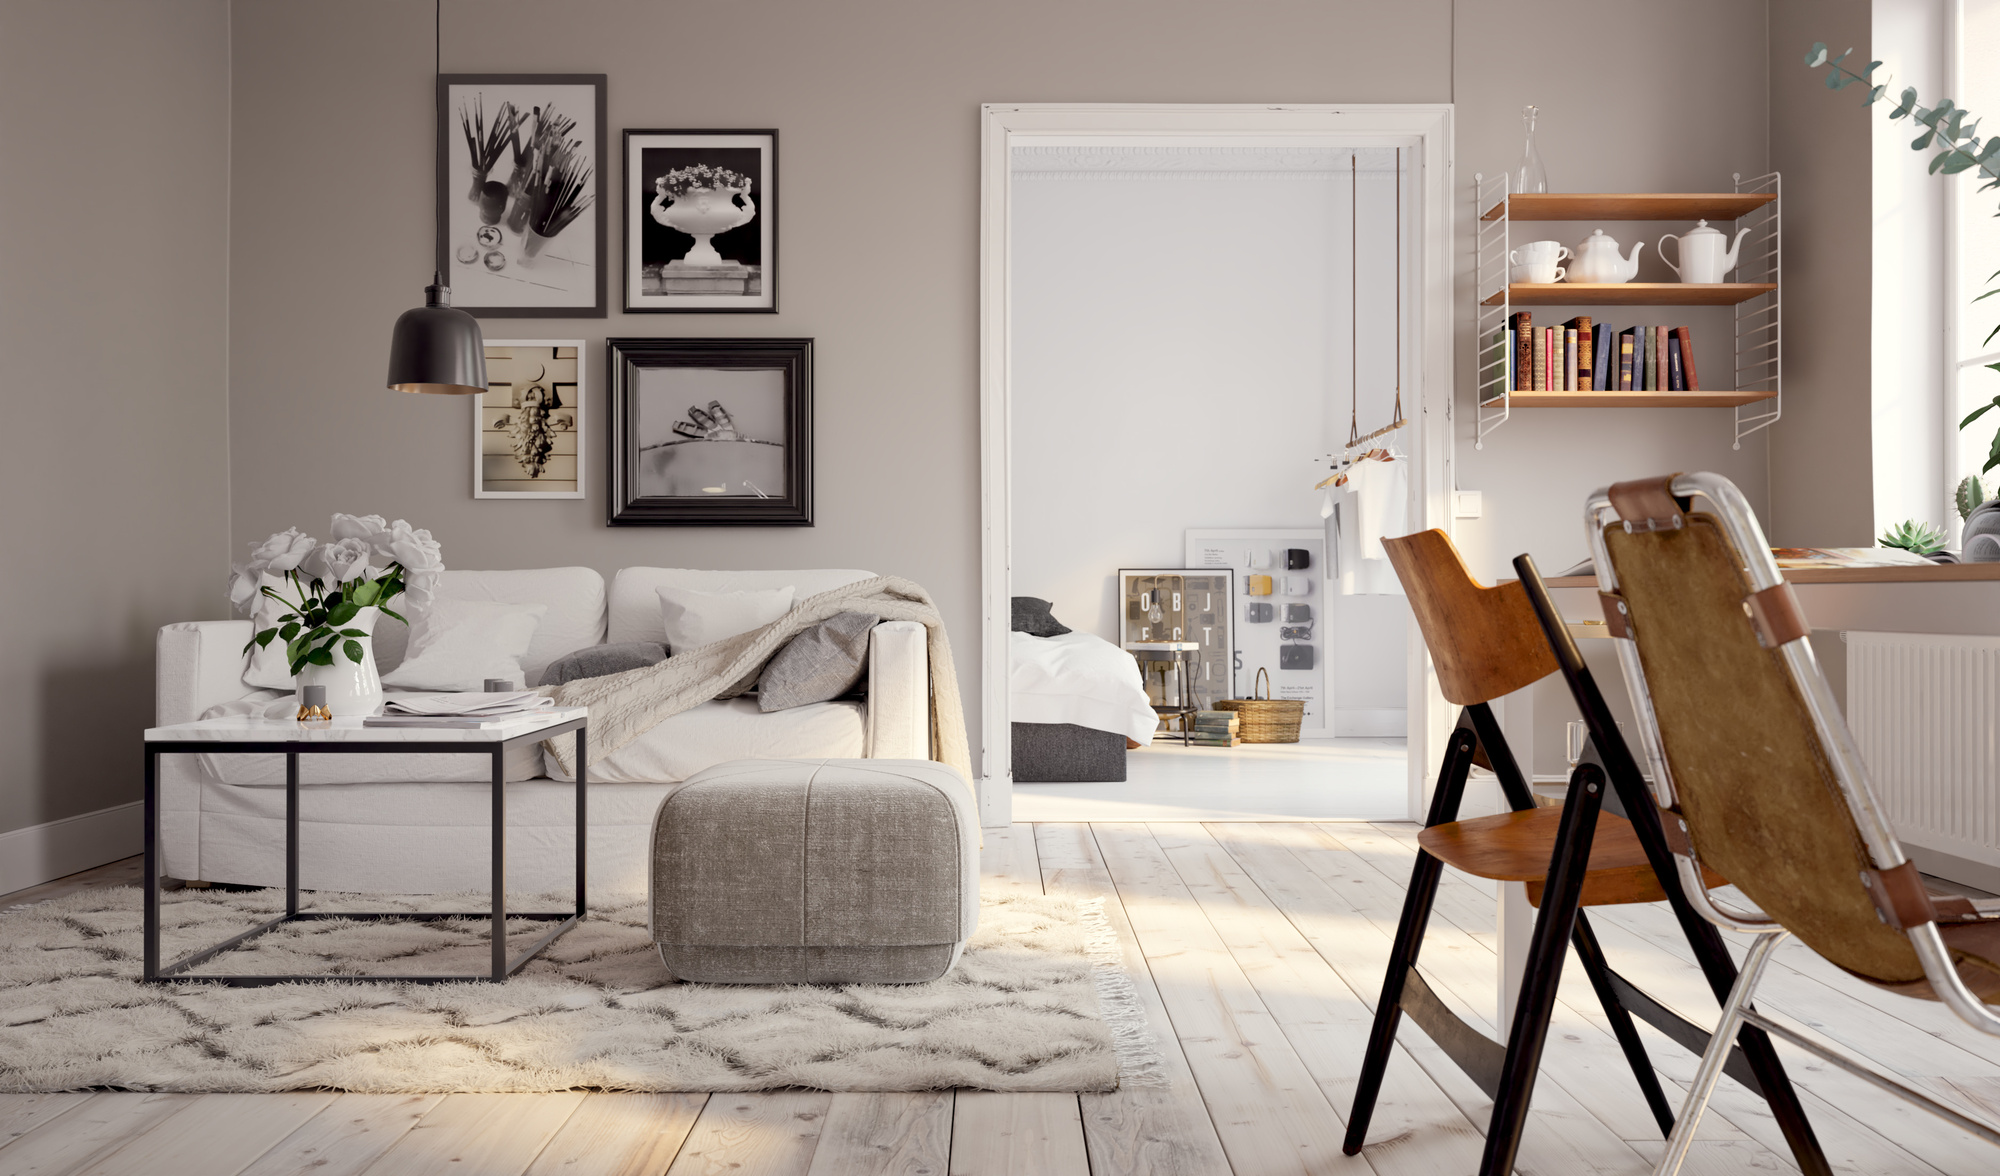 Finding your first apartment can be both exciting and overwhelming. Here are five tips for choosing the right one for you.